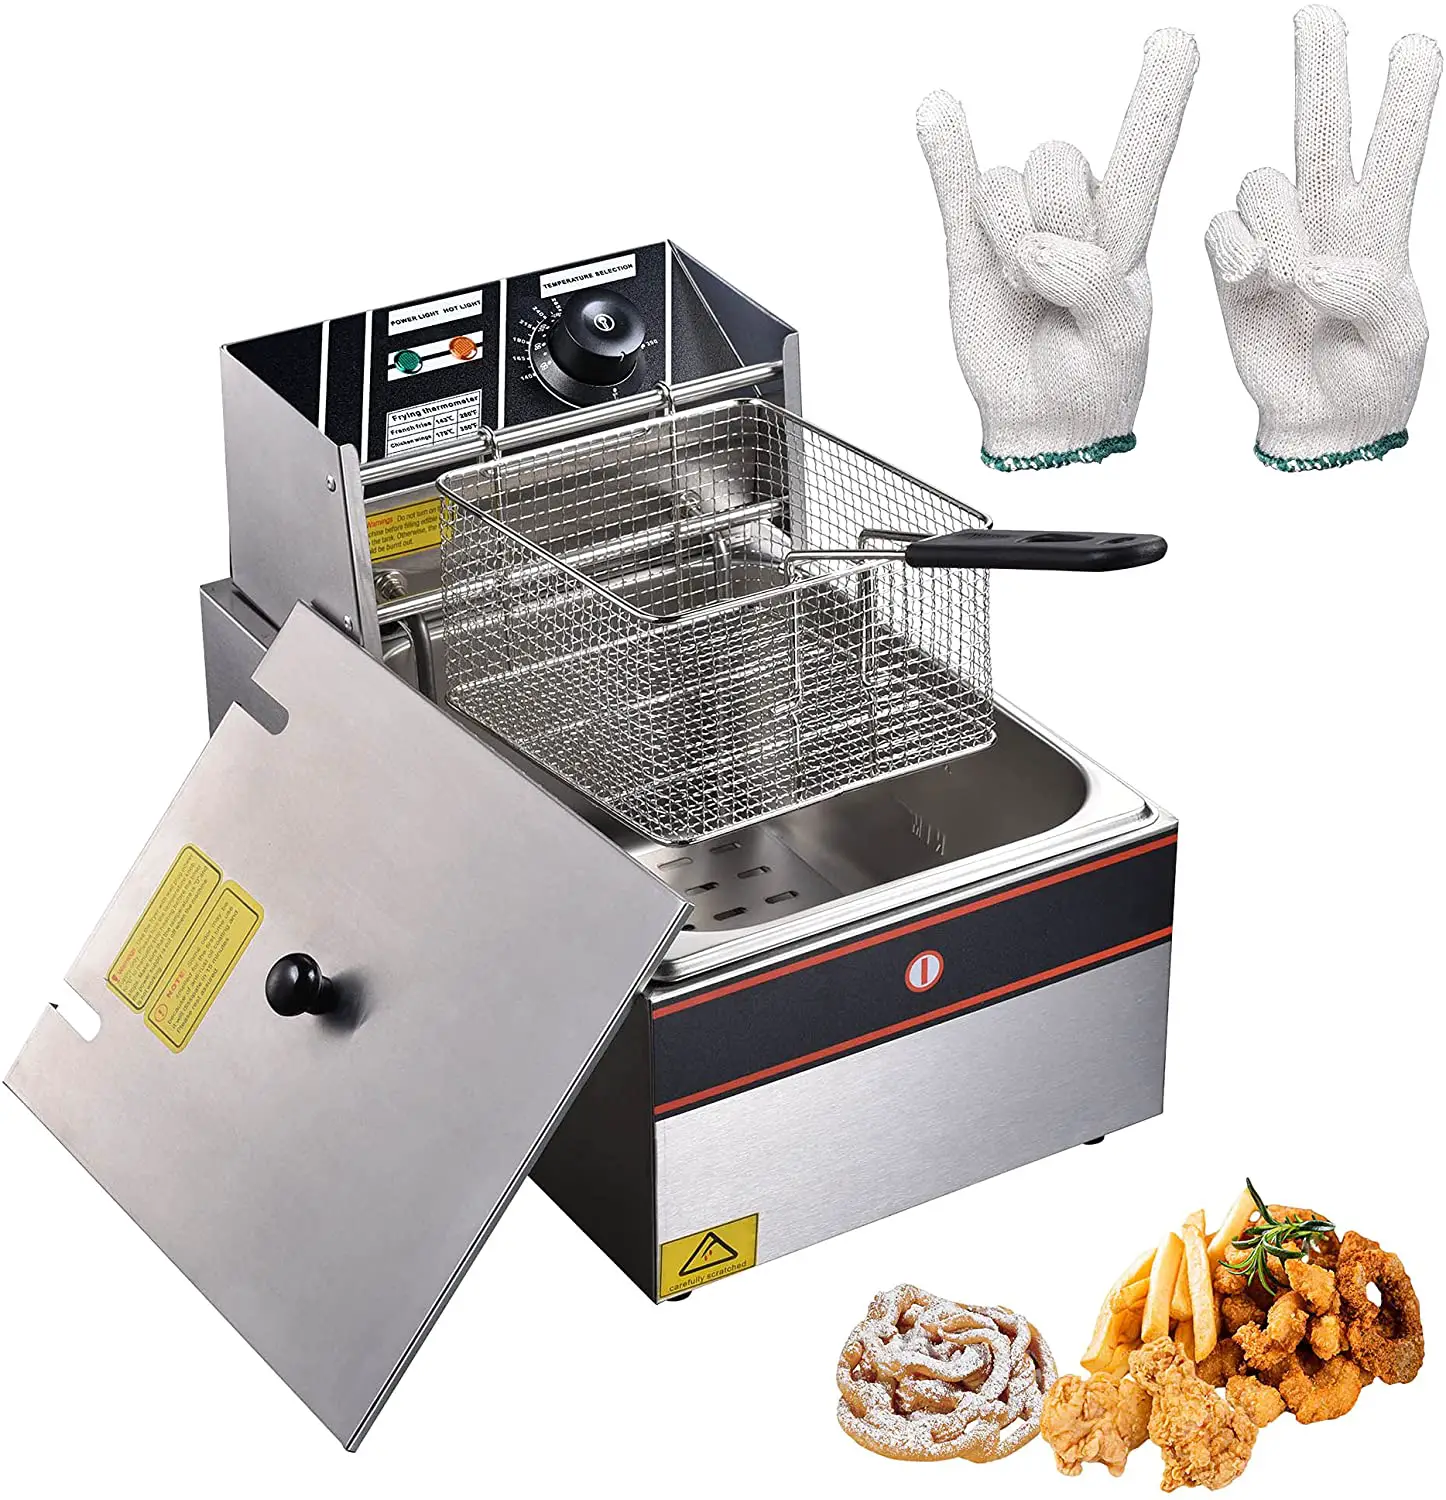 How To Make Funnel Cakes In A Deep Fryer?